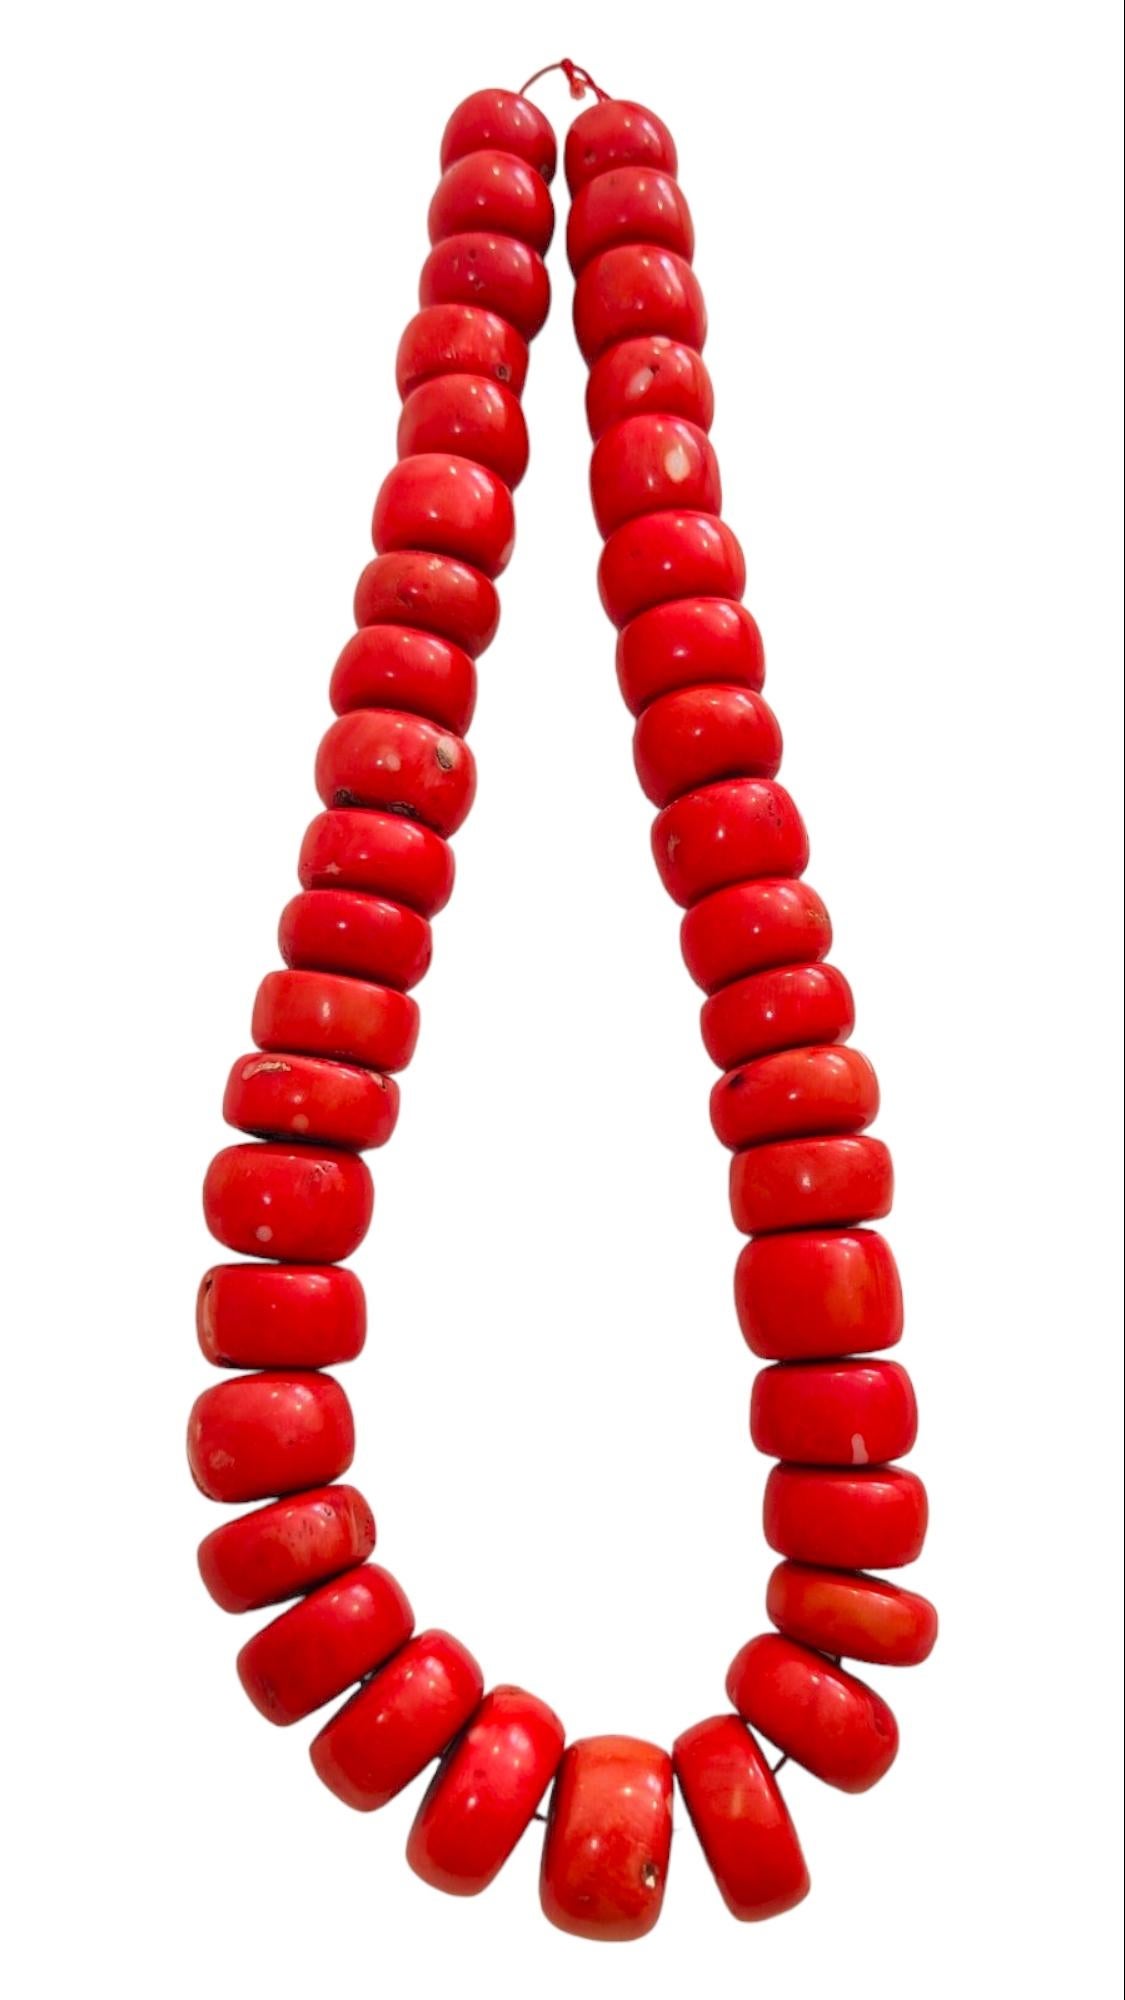 Huge Red Coral Necklace
Huge polished red coral beads complete this fascinating 60cm long necklace. The largest red coral bead is: 25 x 15 mm .550 grams in weight